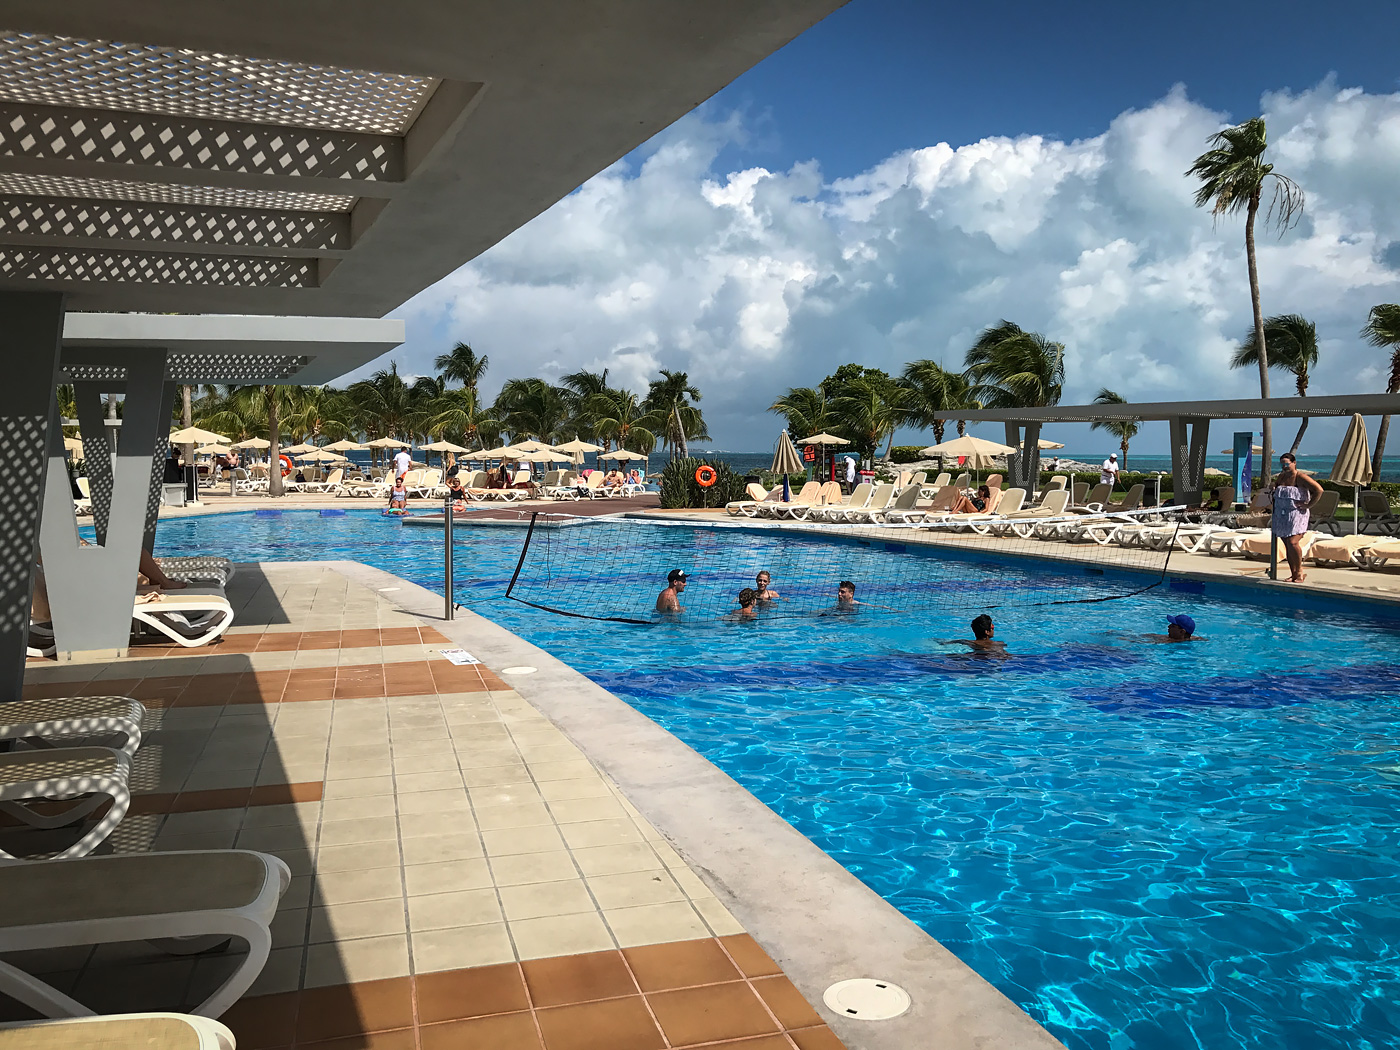 Hotel Riu Palace Peninsula Review: Luxury and Ease in Cancun Resort